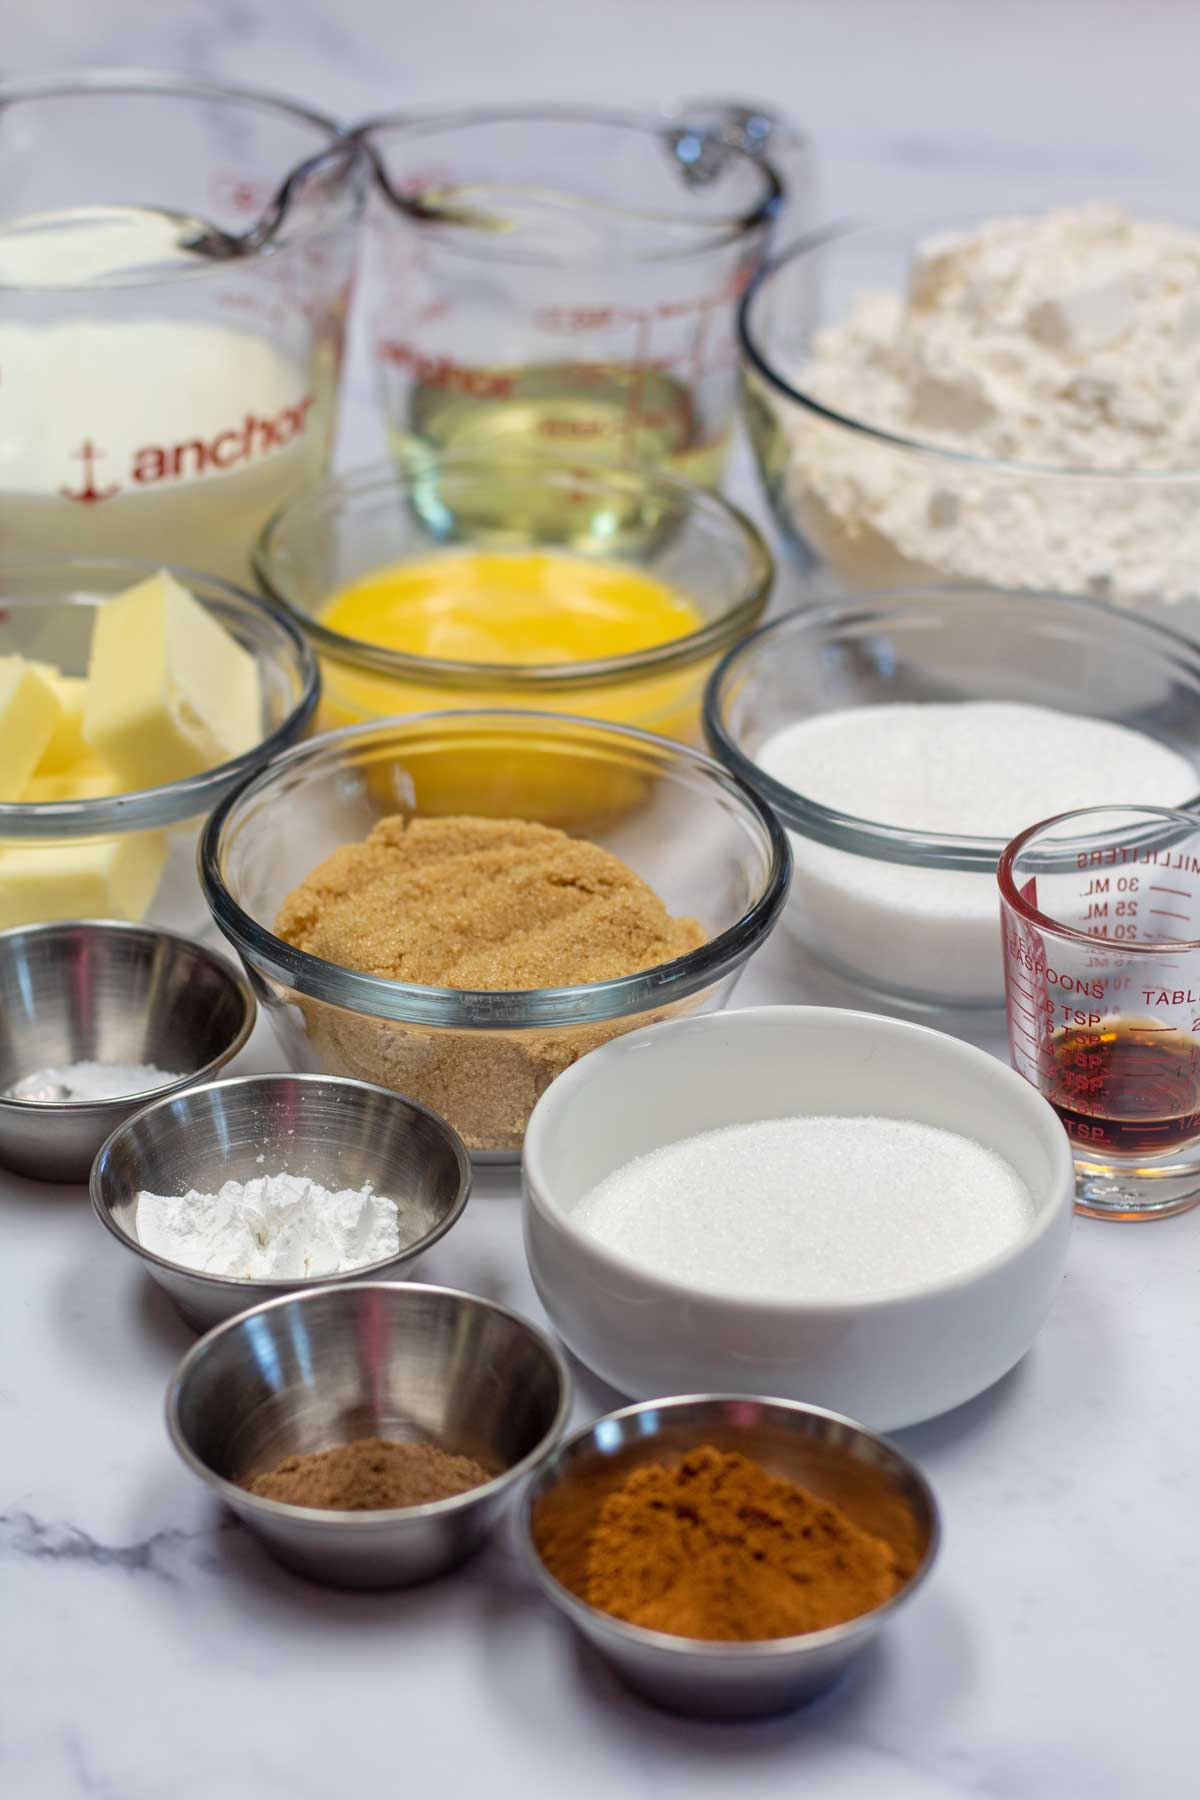 Tall image showing all the ingredients needed to make baked cinnamon sugar donuts.